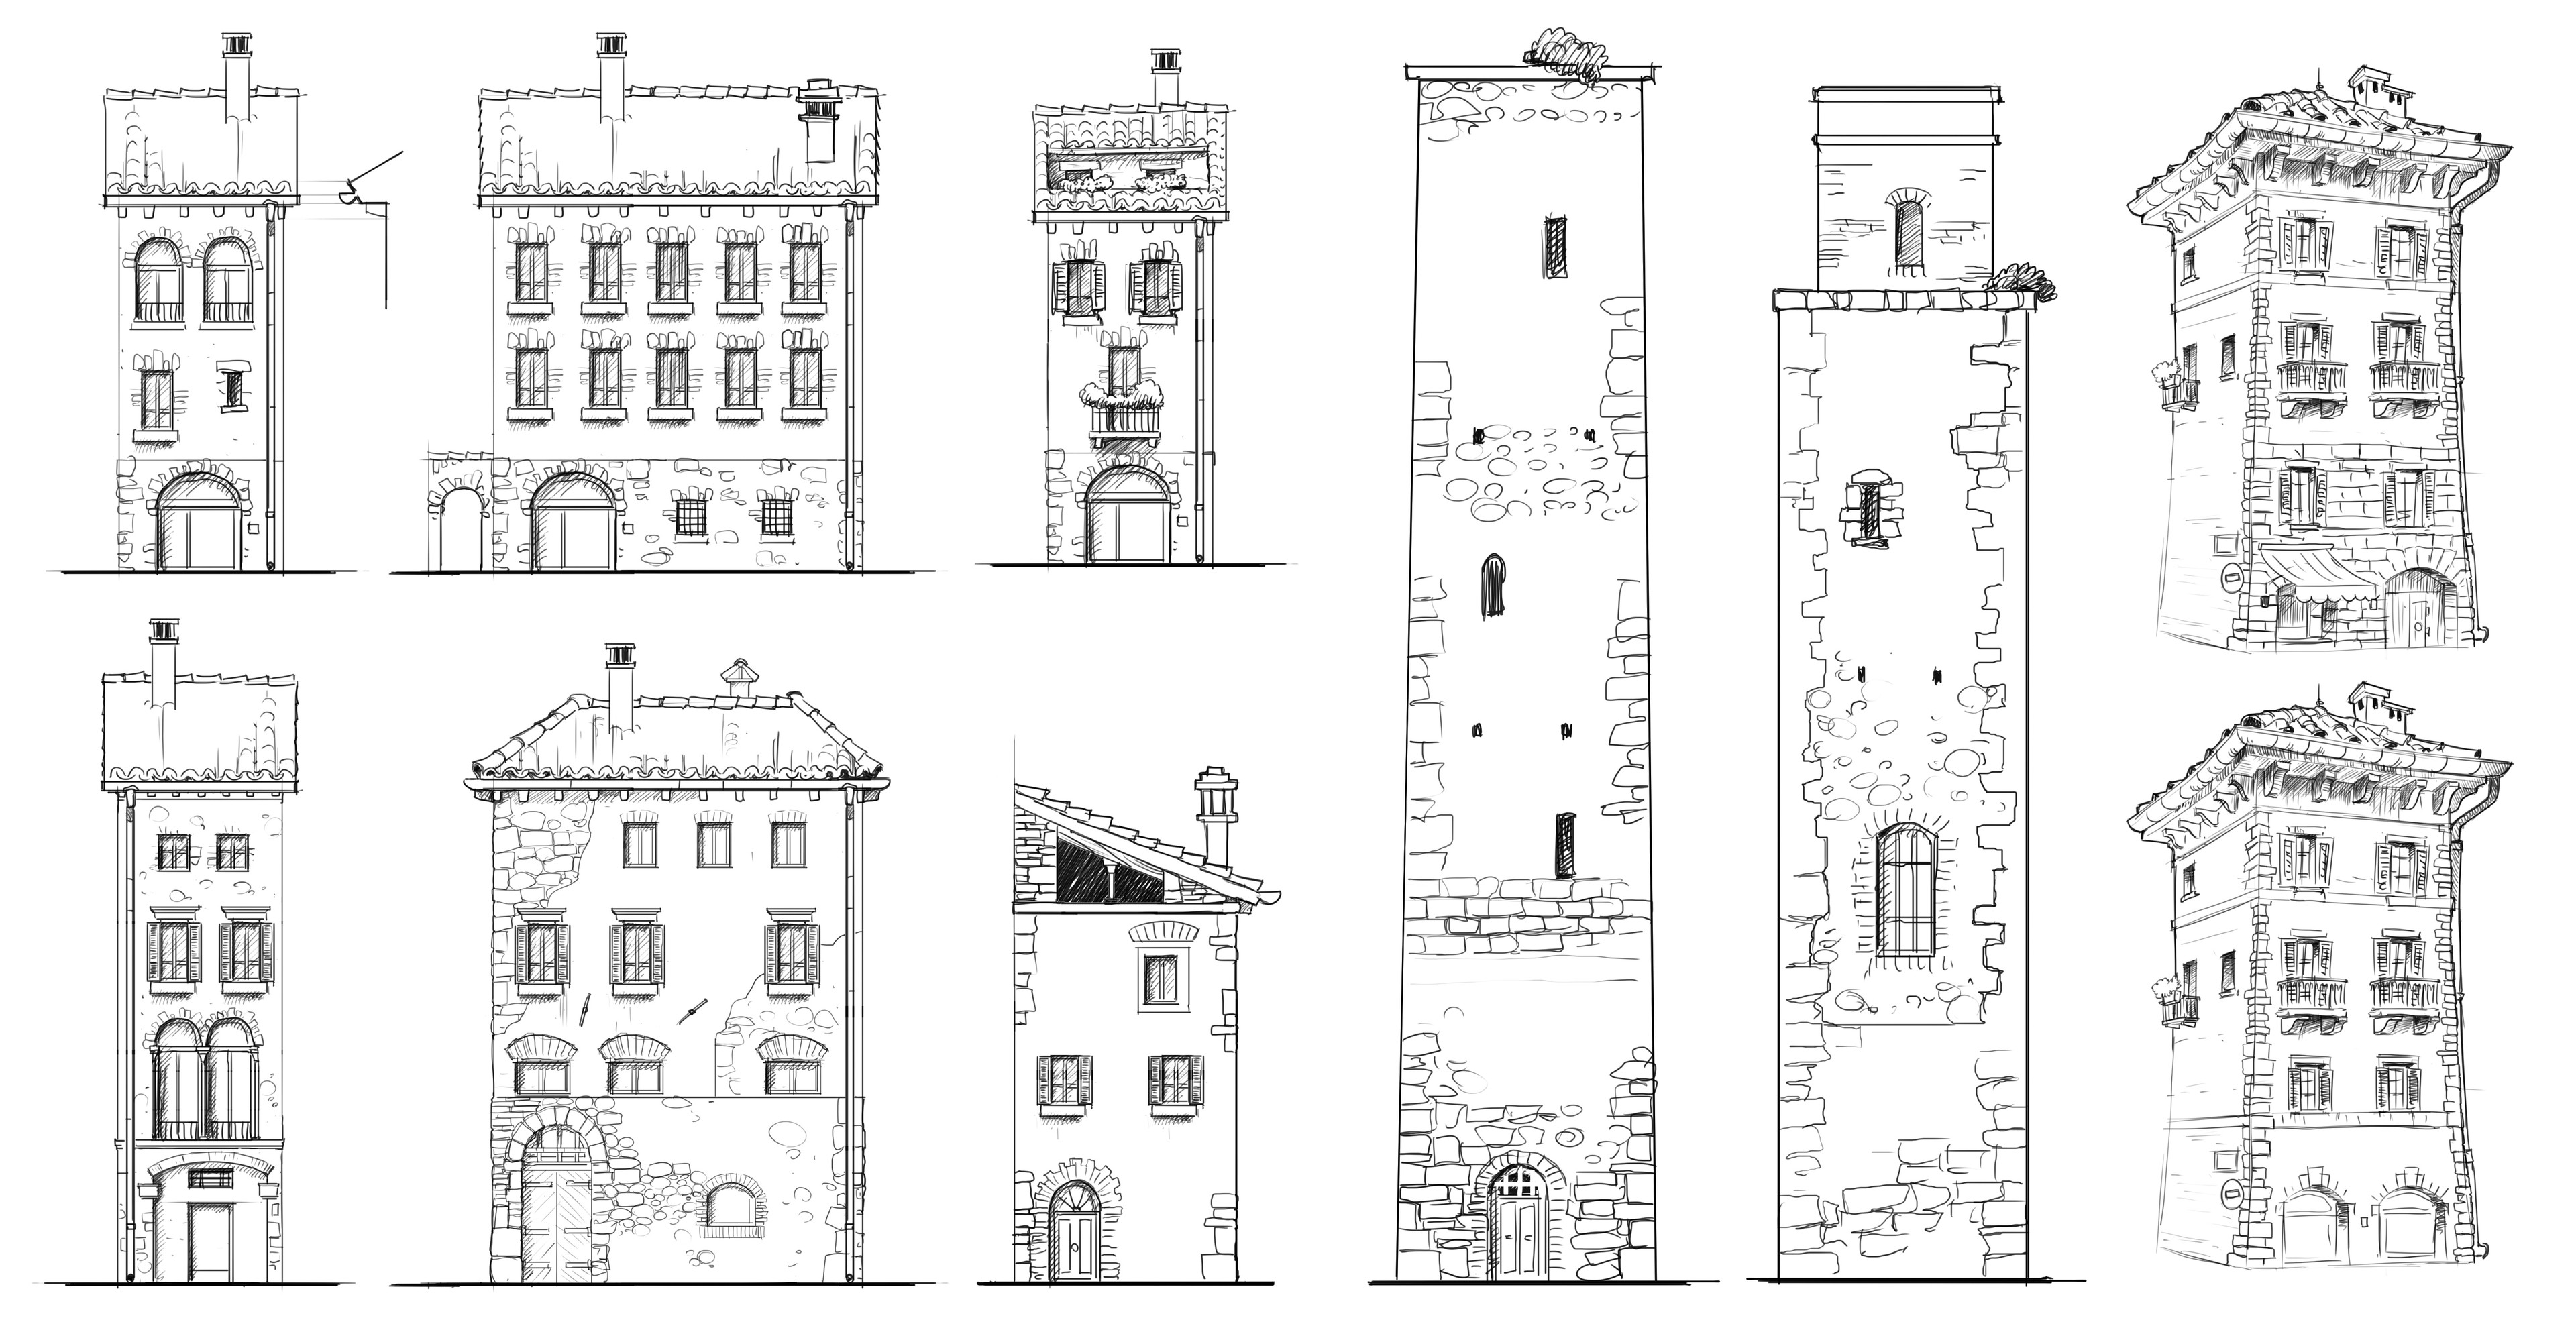 Concepts of the buildings